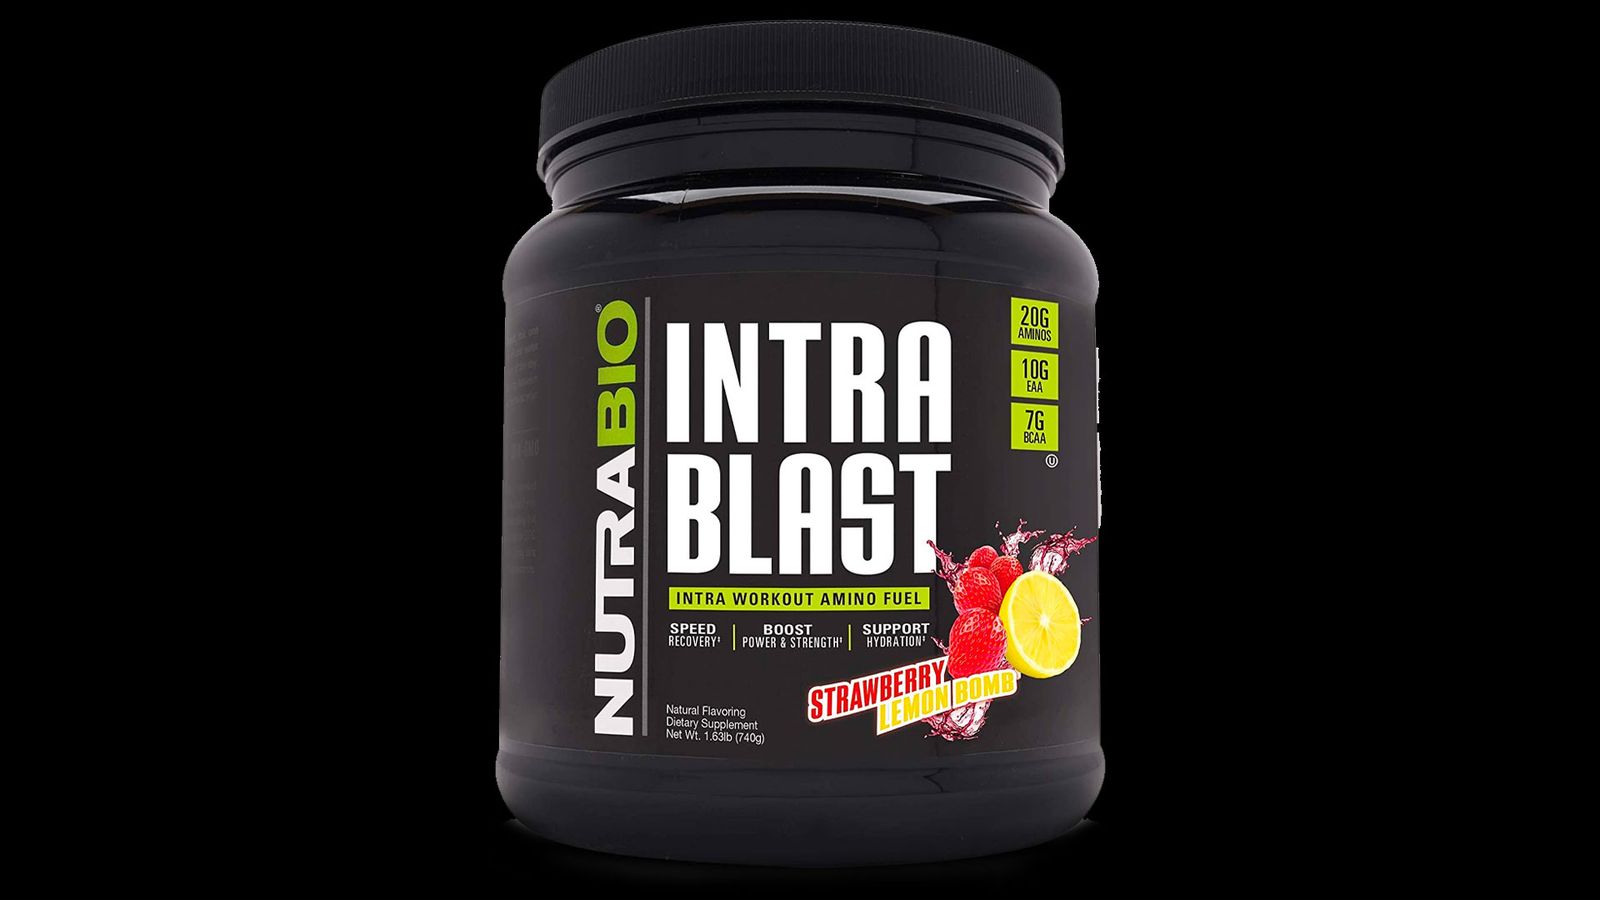 NutraBio Intra Blast product image of a black container with green and white branding.